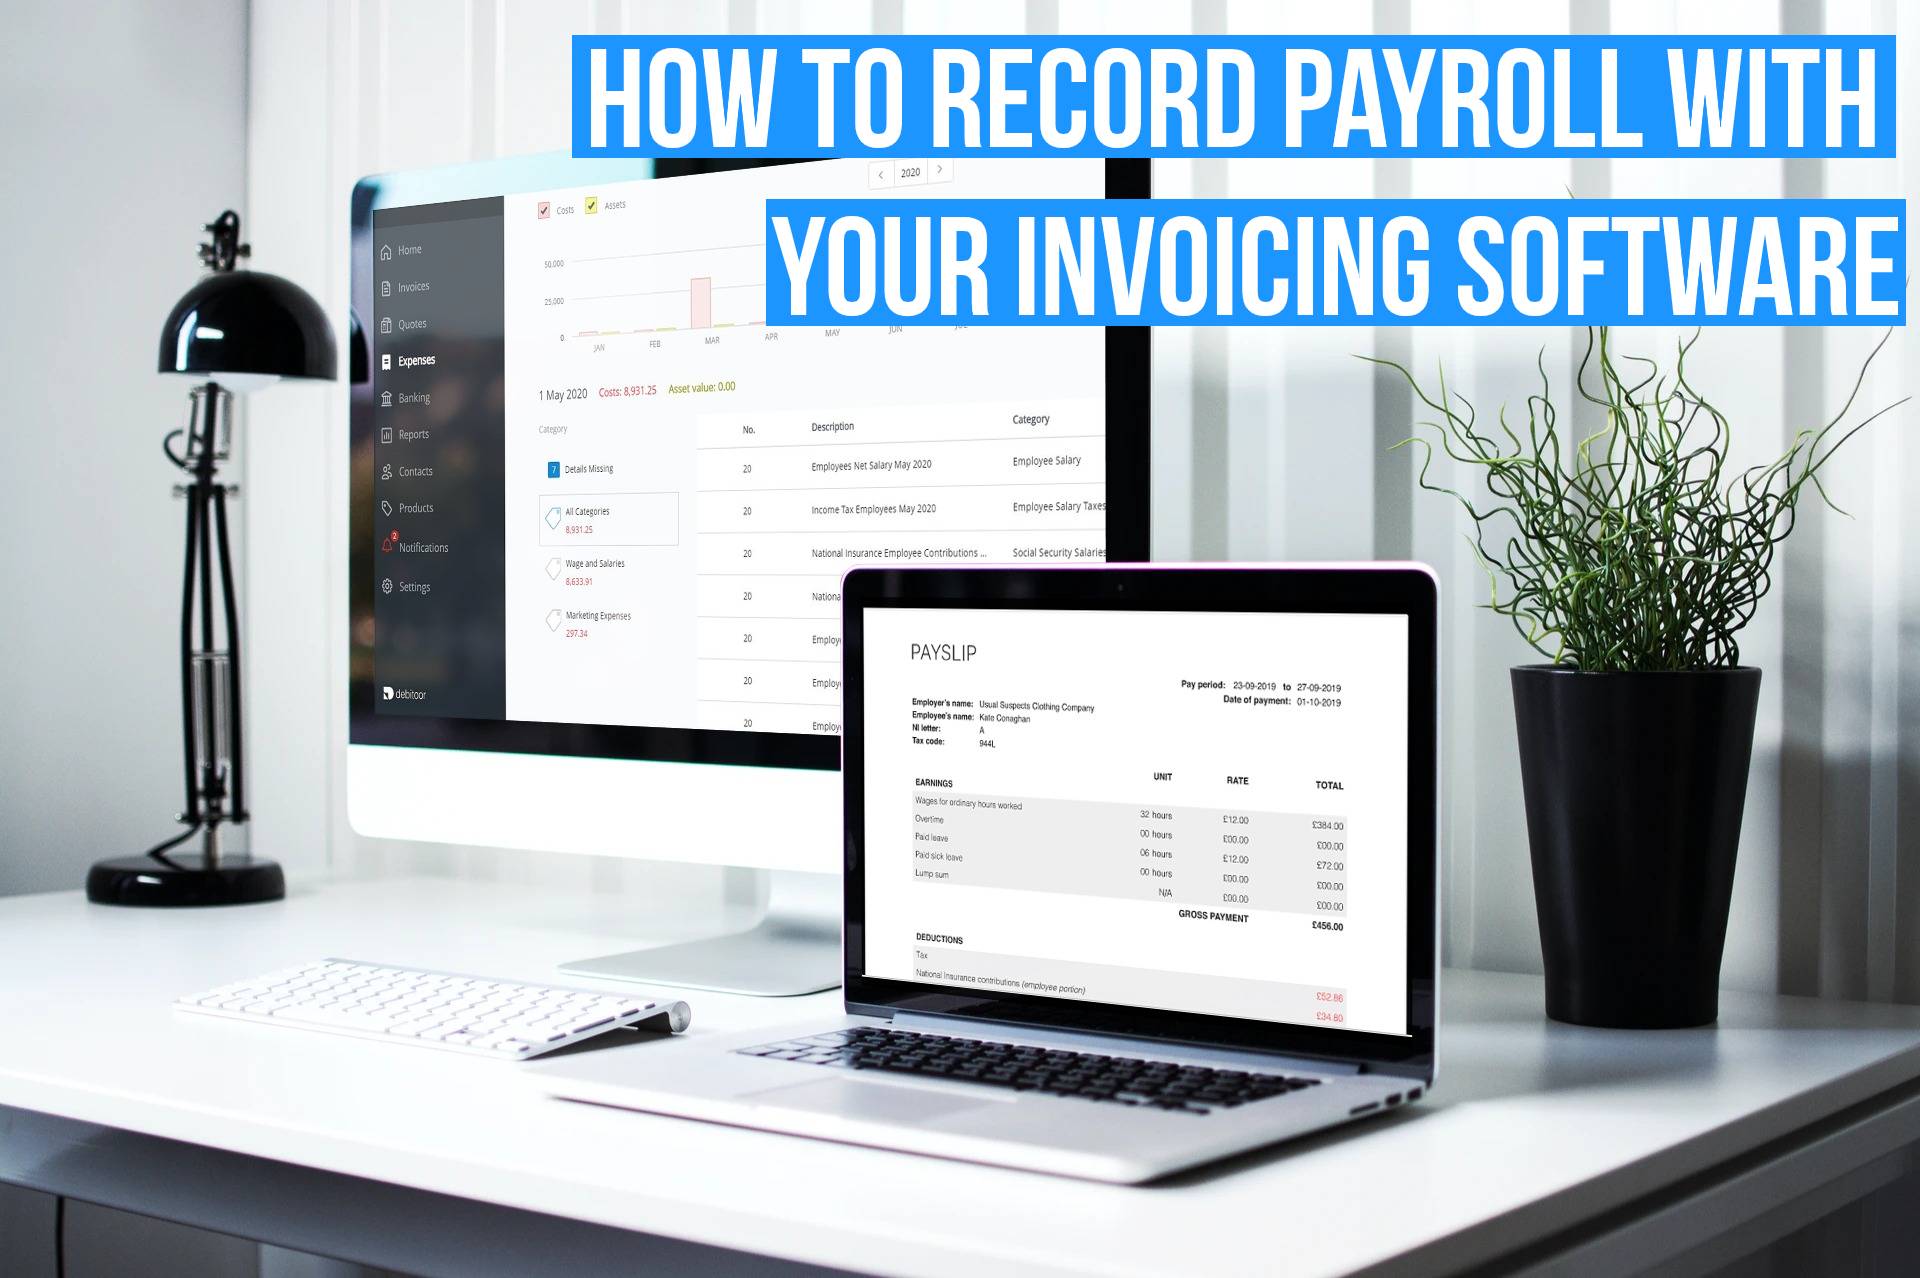 How to record payroll with invoicing software title image